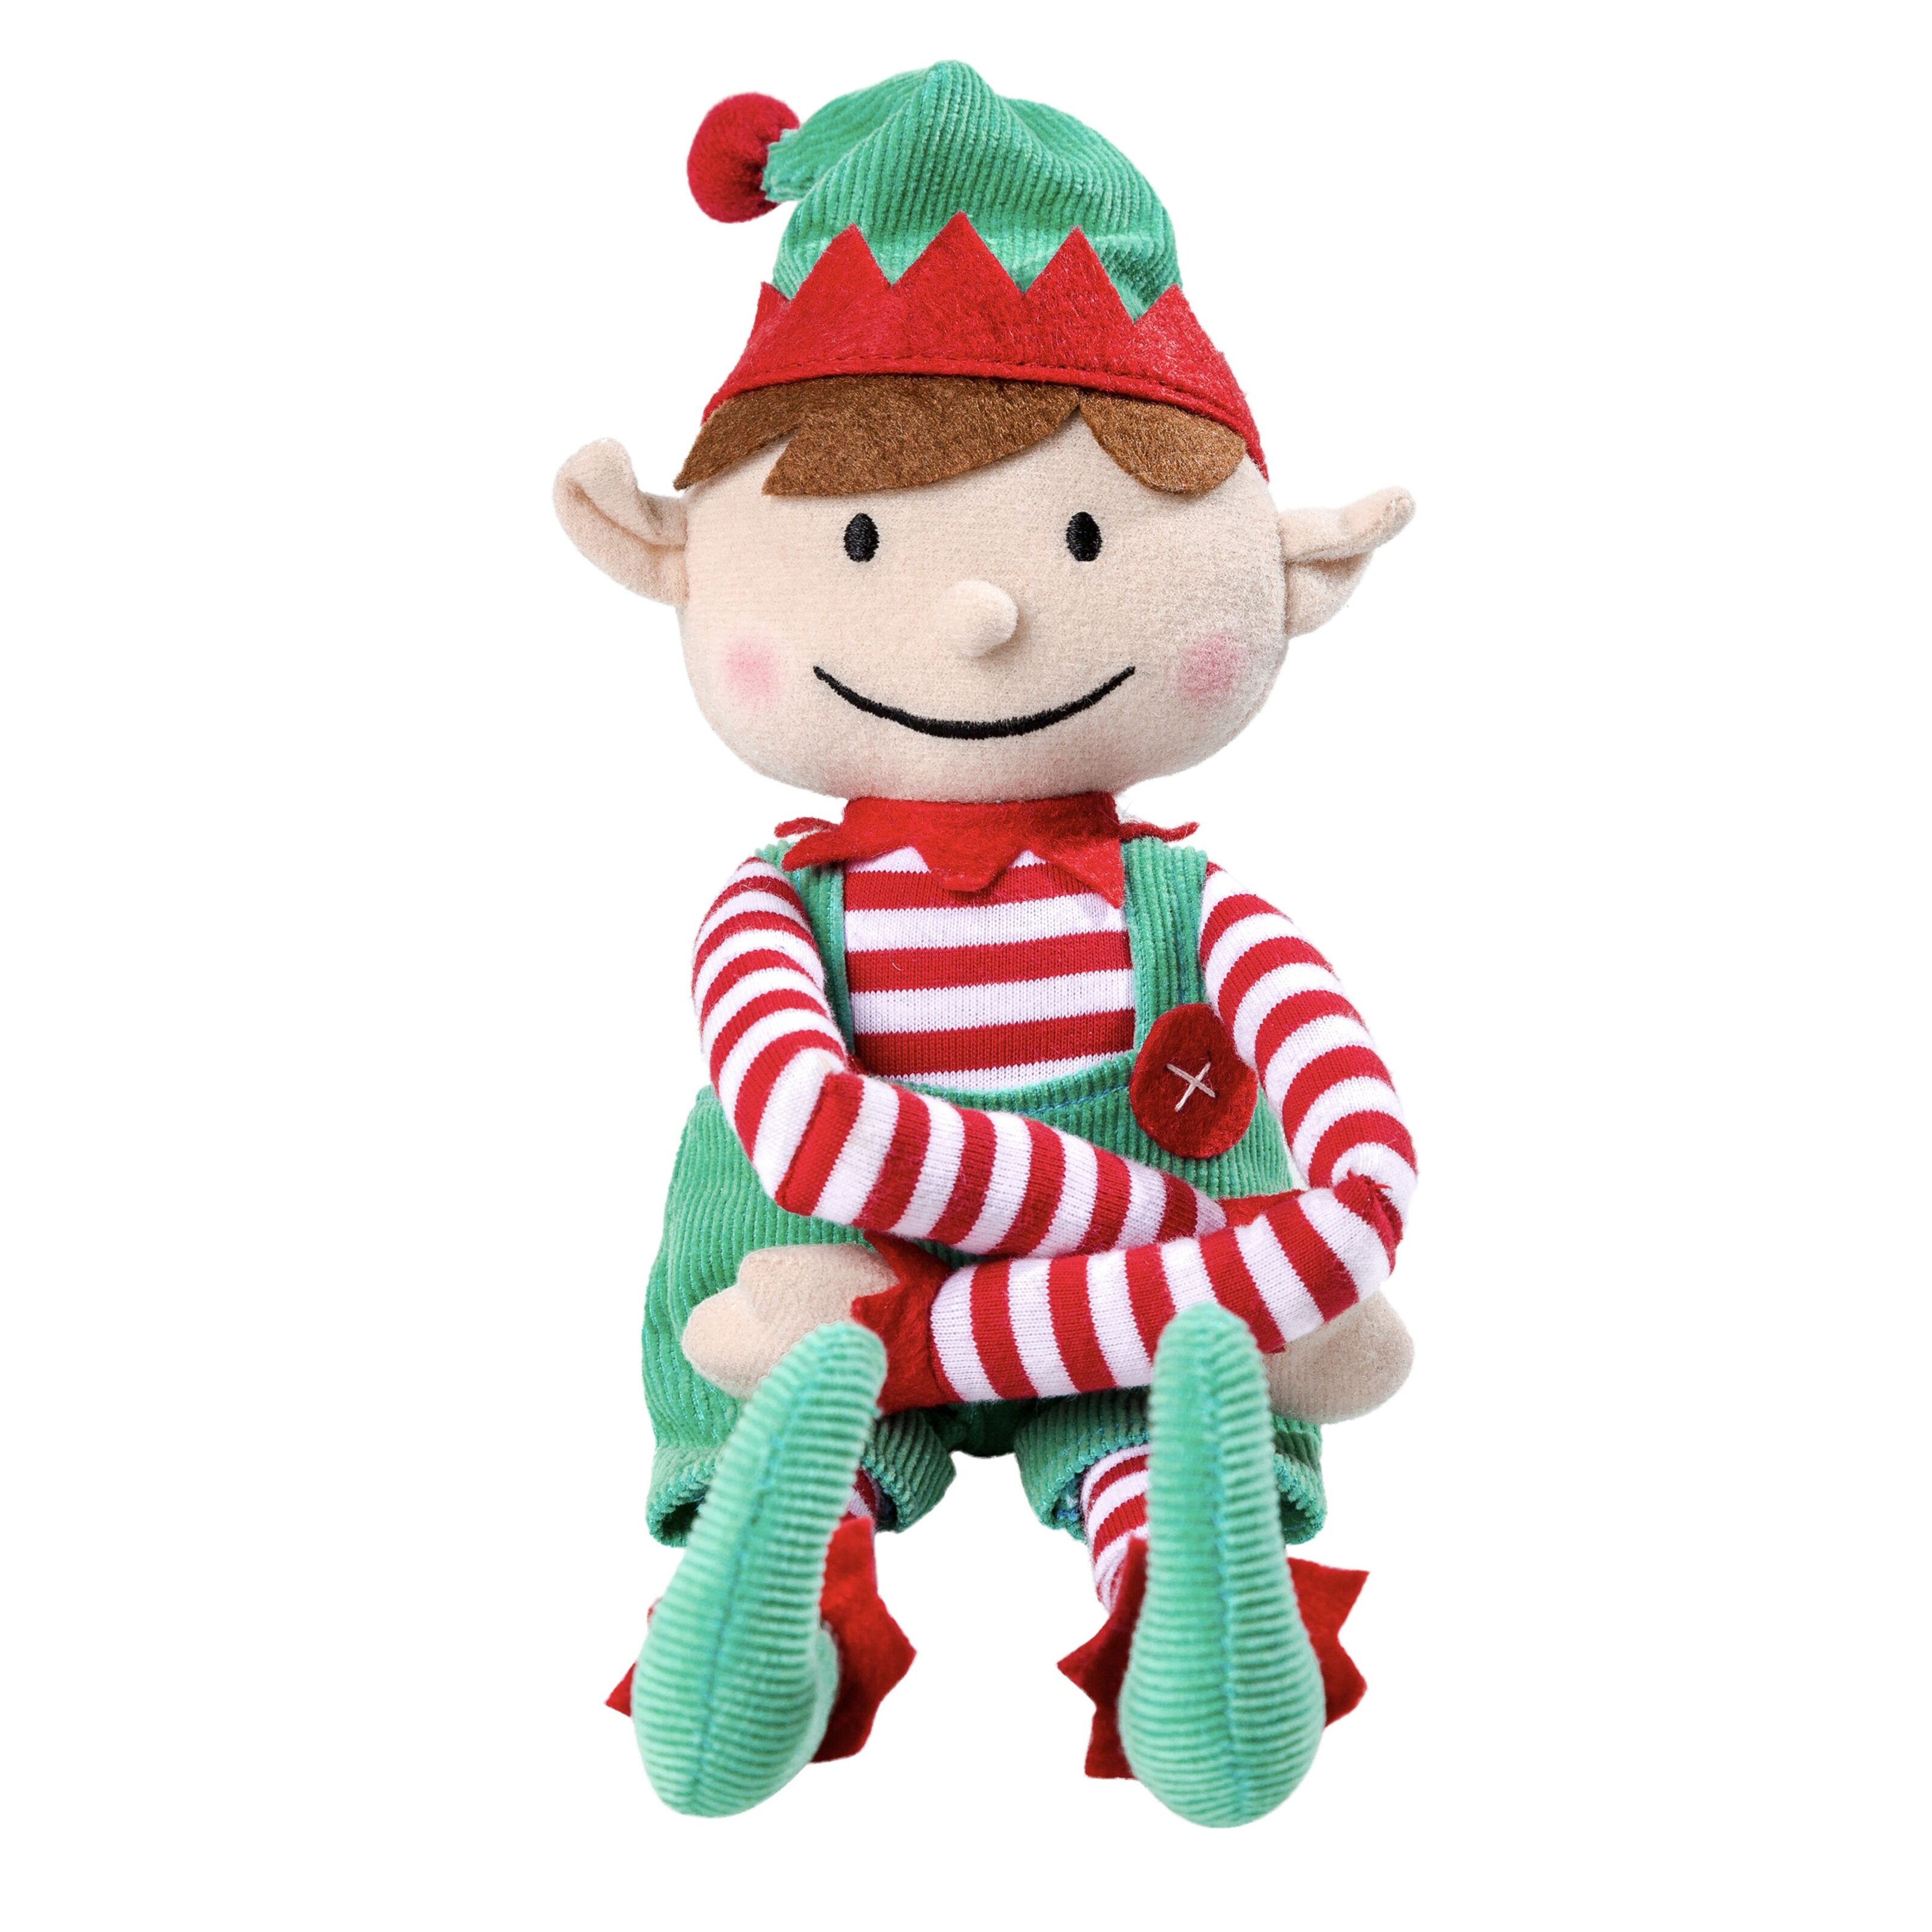 The Elf on the Shelf: A Christmas Tradition - Lutin fille peau claire